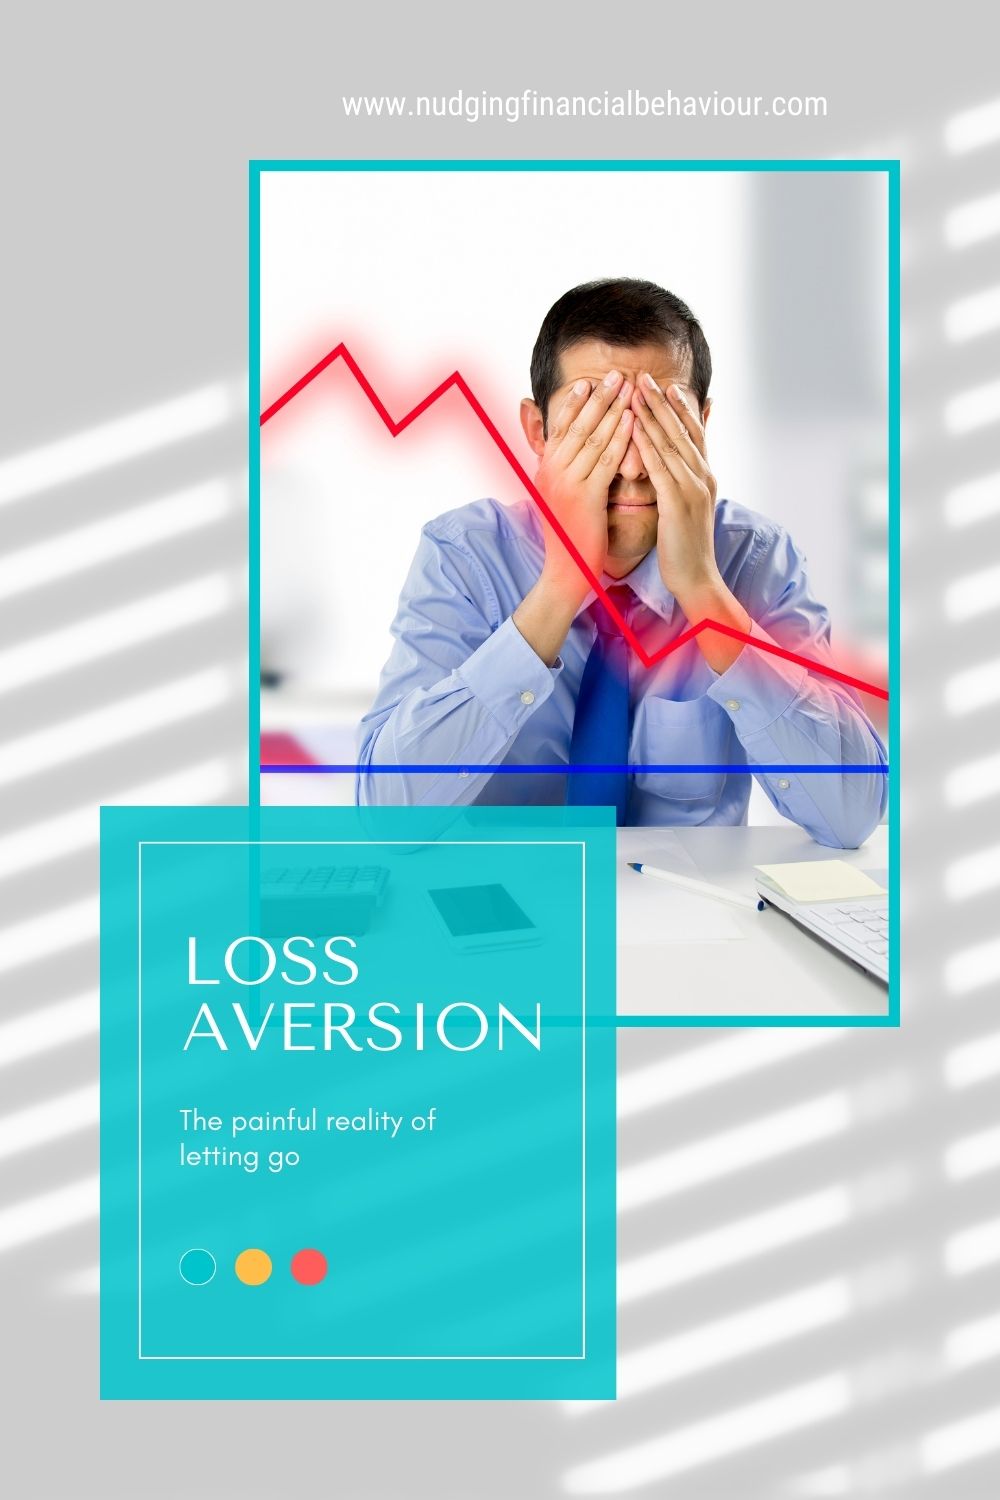 loss aversion meaning